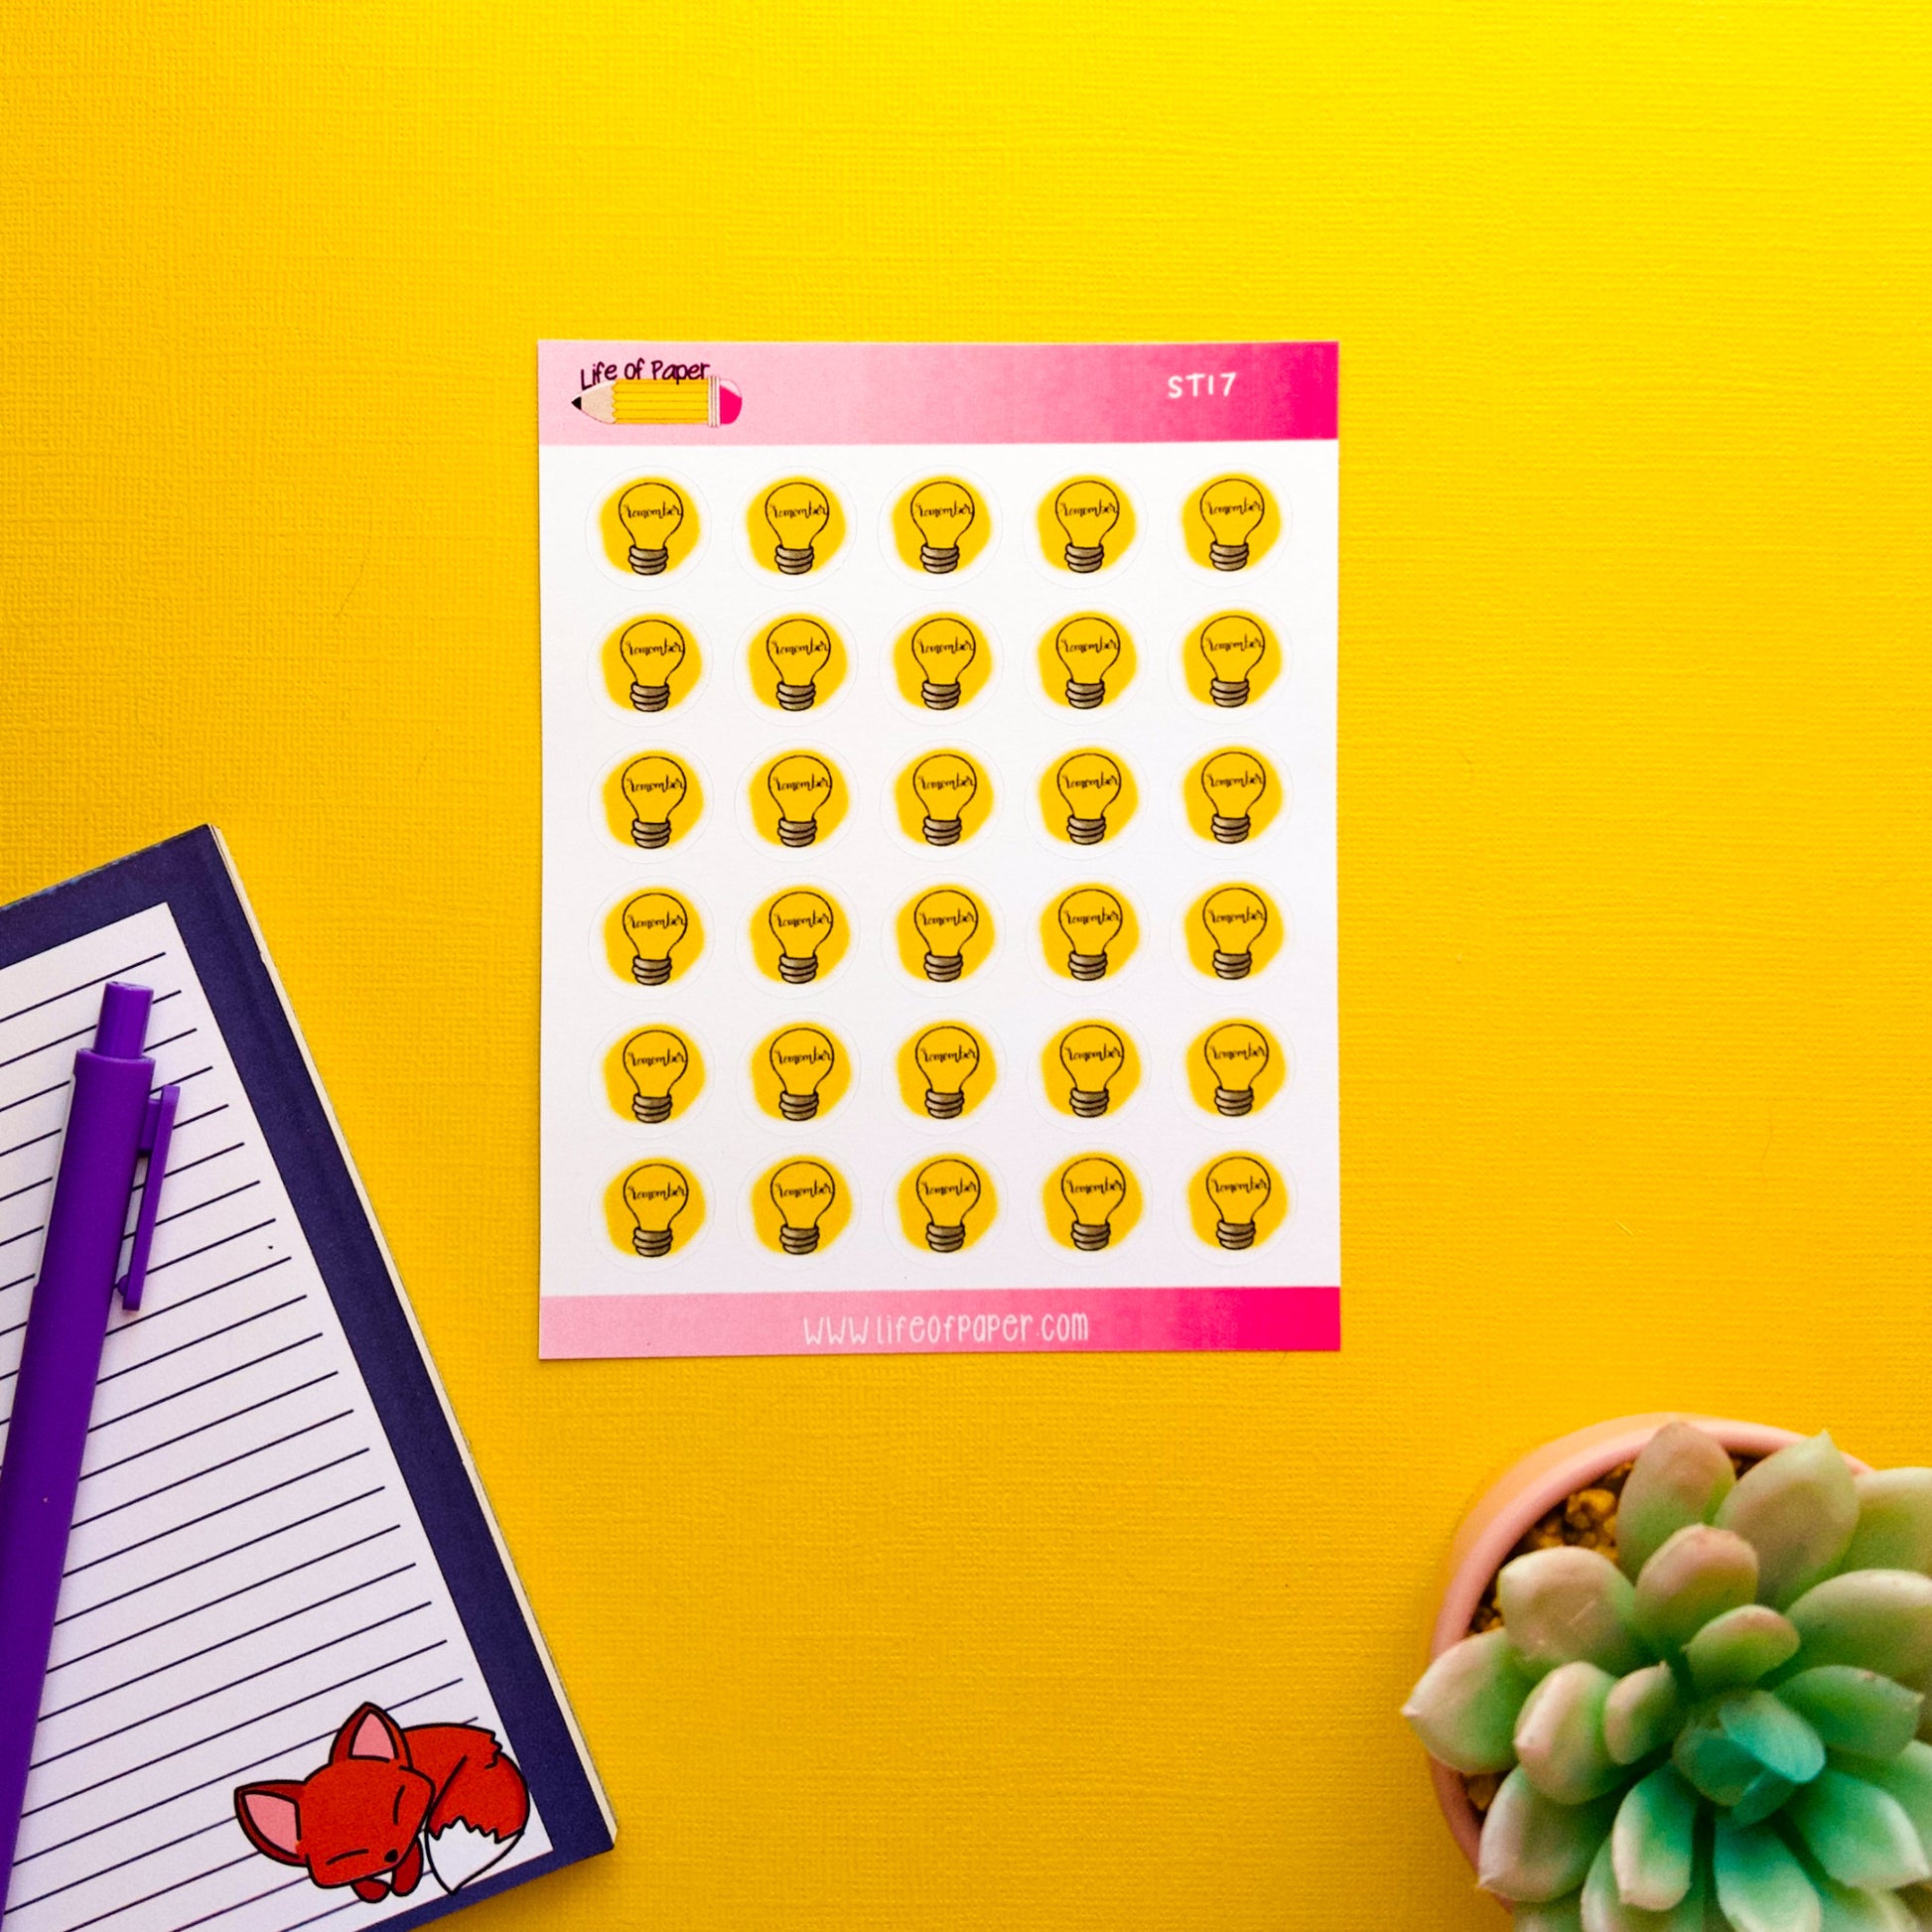 A sheet of Remember Planner Stickers featuring various expressions against a bright yellow background is on the left, along with a notepad with a fox illustration and a purple pen, perfect for planning your goals. A small potted succulent plant is on the right.